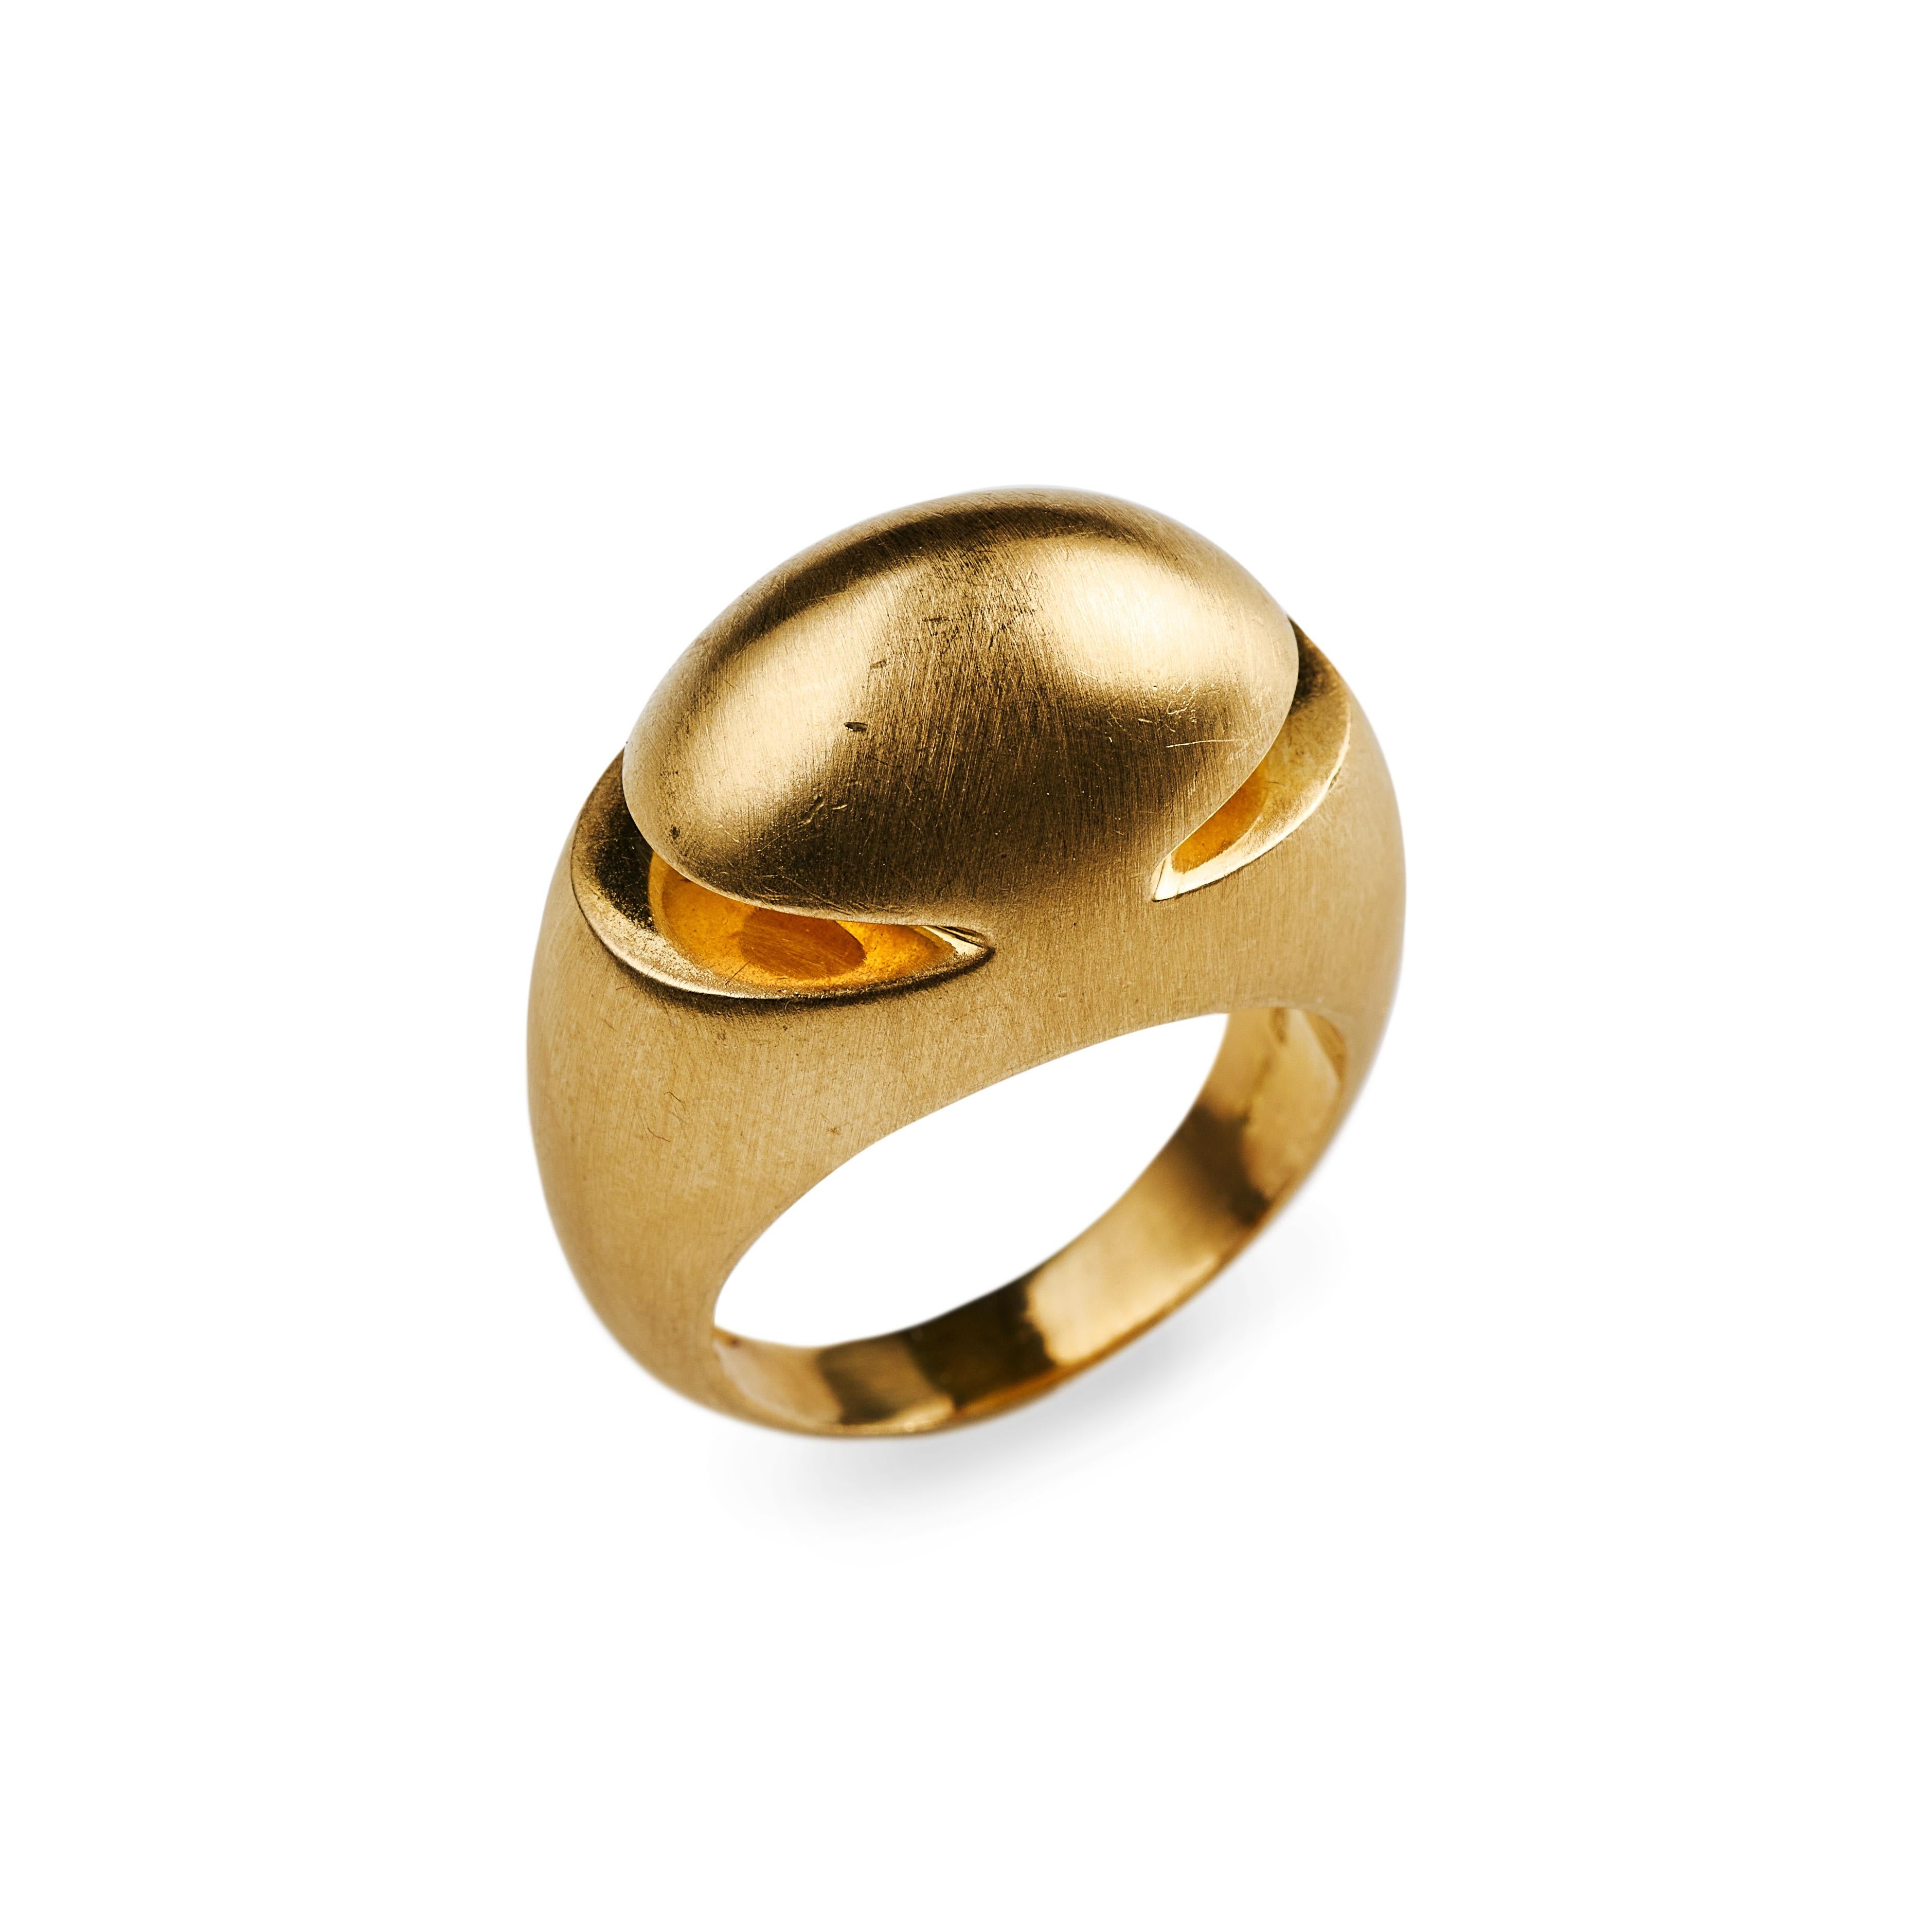 Celebrating the beauty of simplicity.
Cut-out accents elevate this design’s sleek sense of sophistication.
18K brushed gold cut dome ring by Bvlgari, designed circa 2000.

7 gram, Size 7.5, dome 11.7mm high, ring 24.3 mm wide
